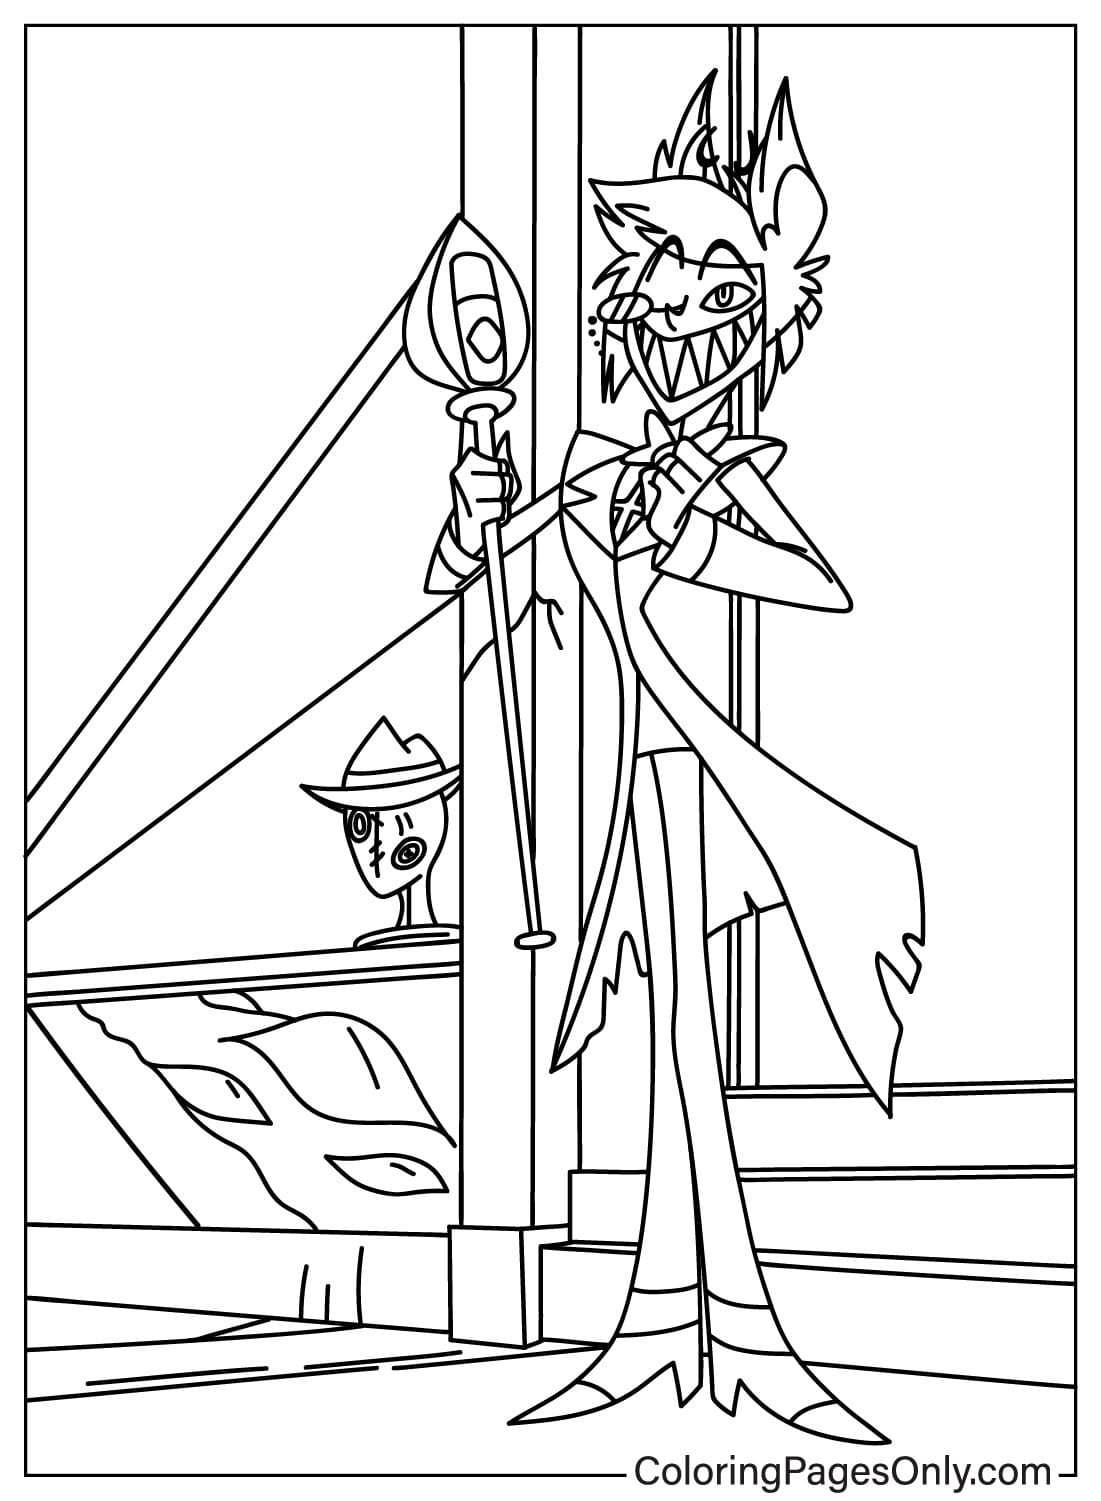 Alastor Coloring Page from Hazbin Hotel